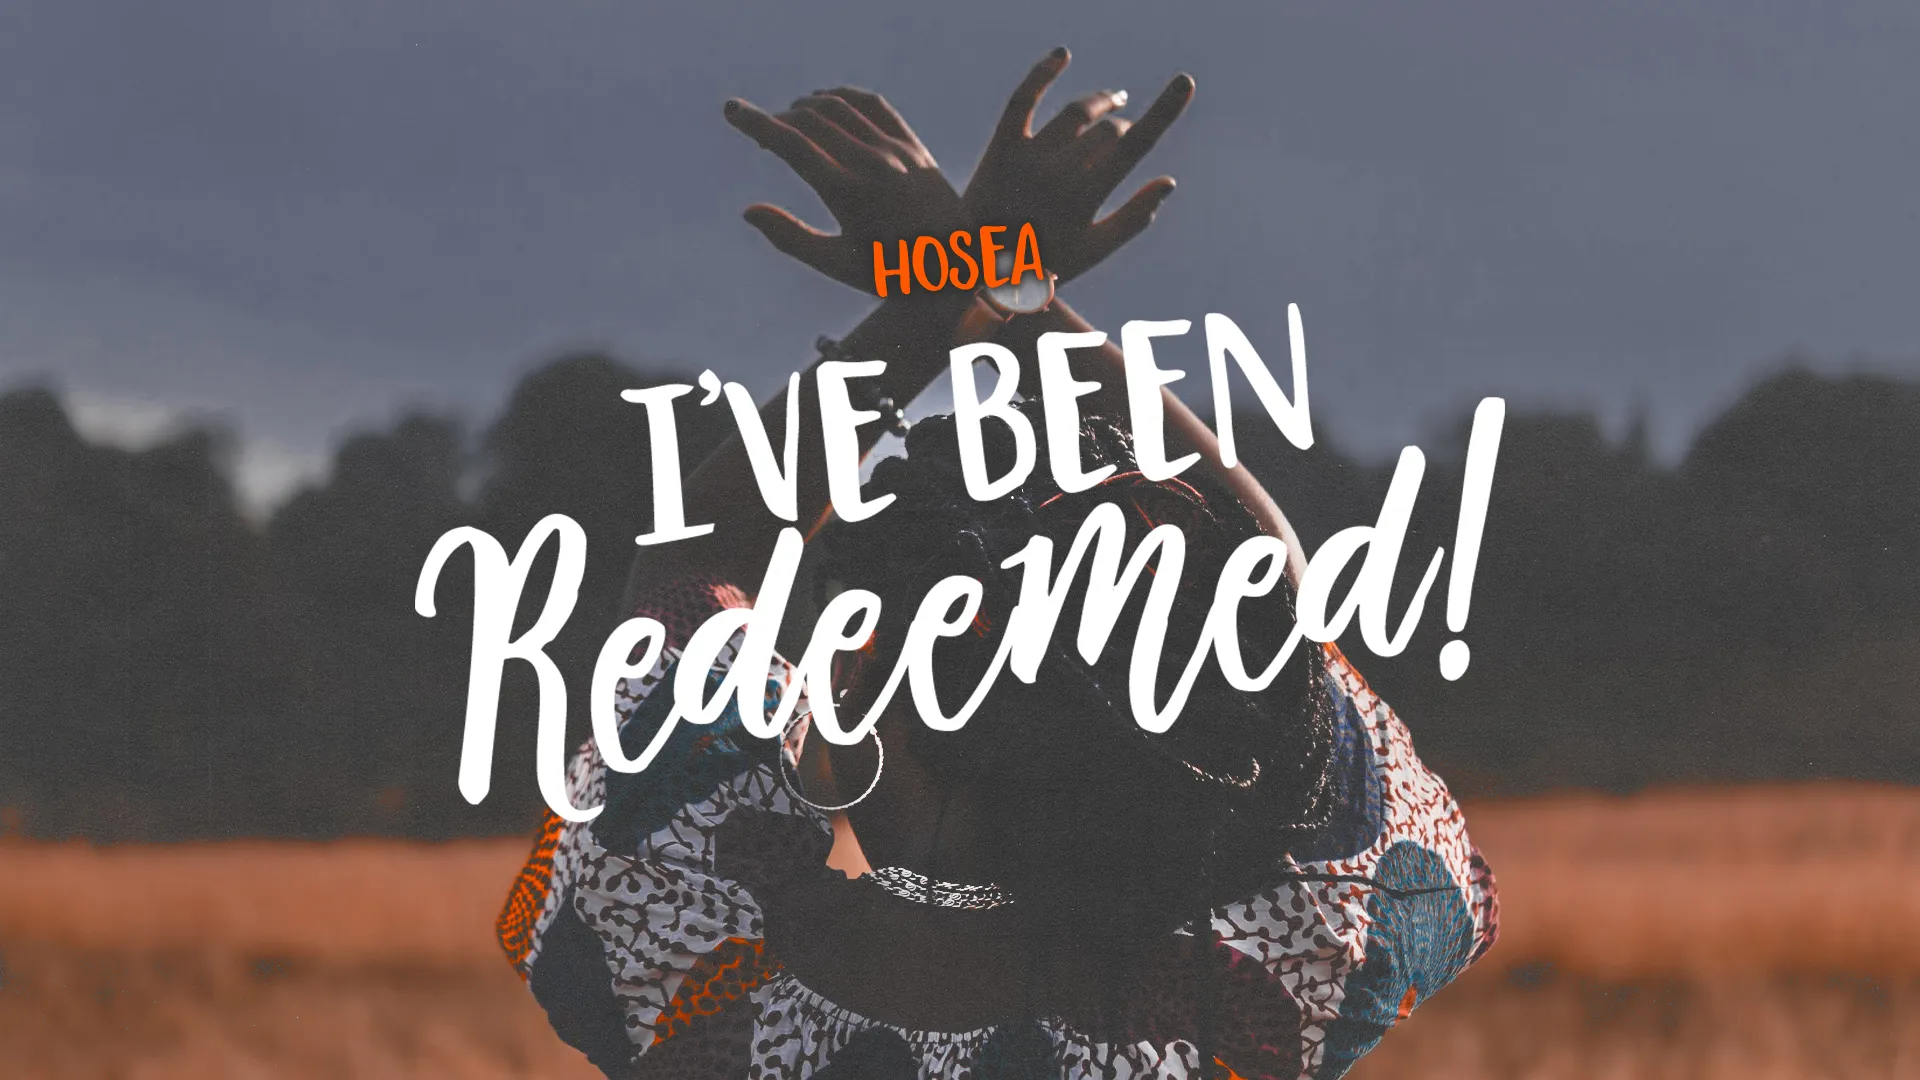 Bring To Light The Powerful Theme Of Salvation With This 'I'Ve Been Redeemed!' Graphic, A Must-Have For Your Church Media Collection To Enrich Sermons On Redemption And God'S Enduring Love.